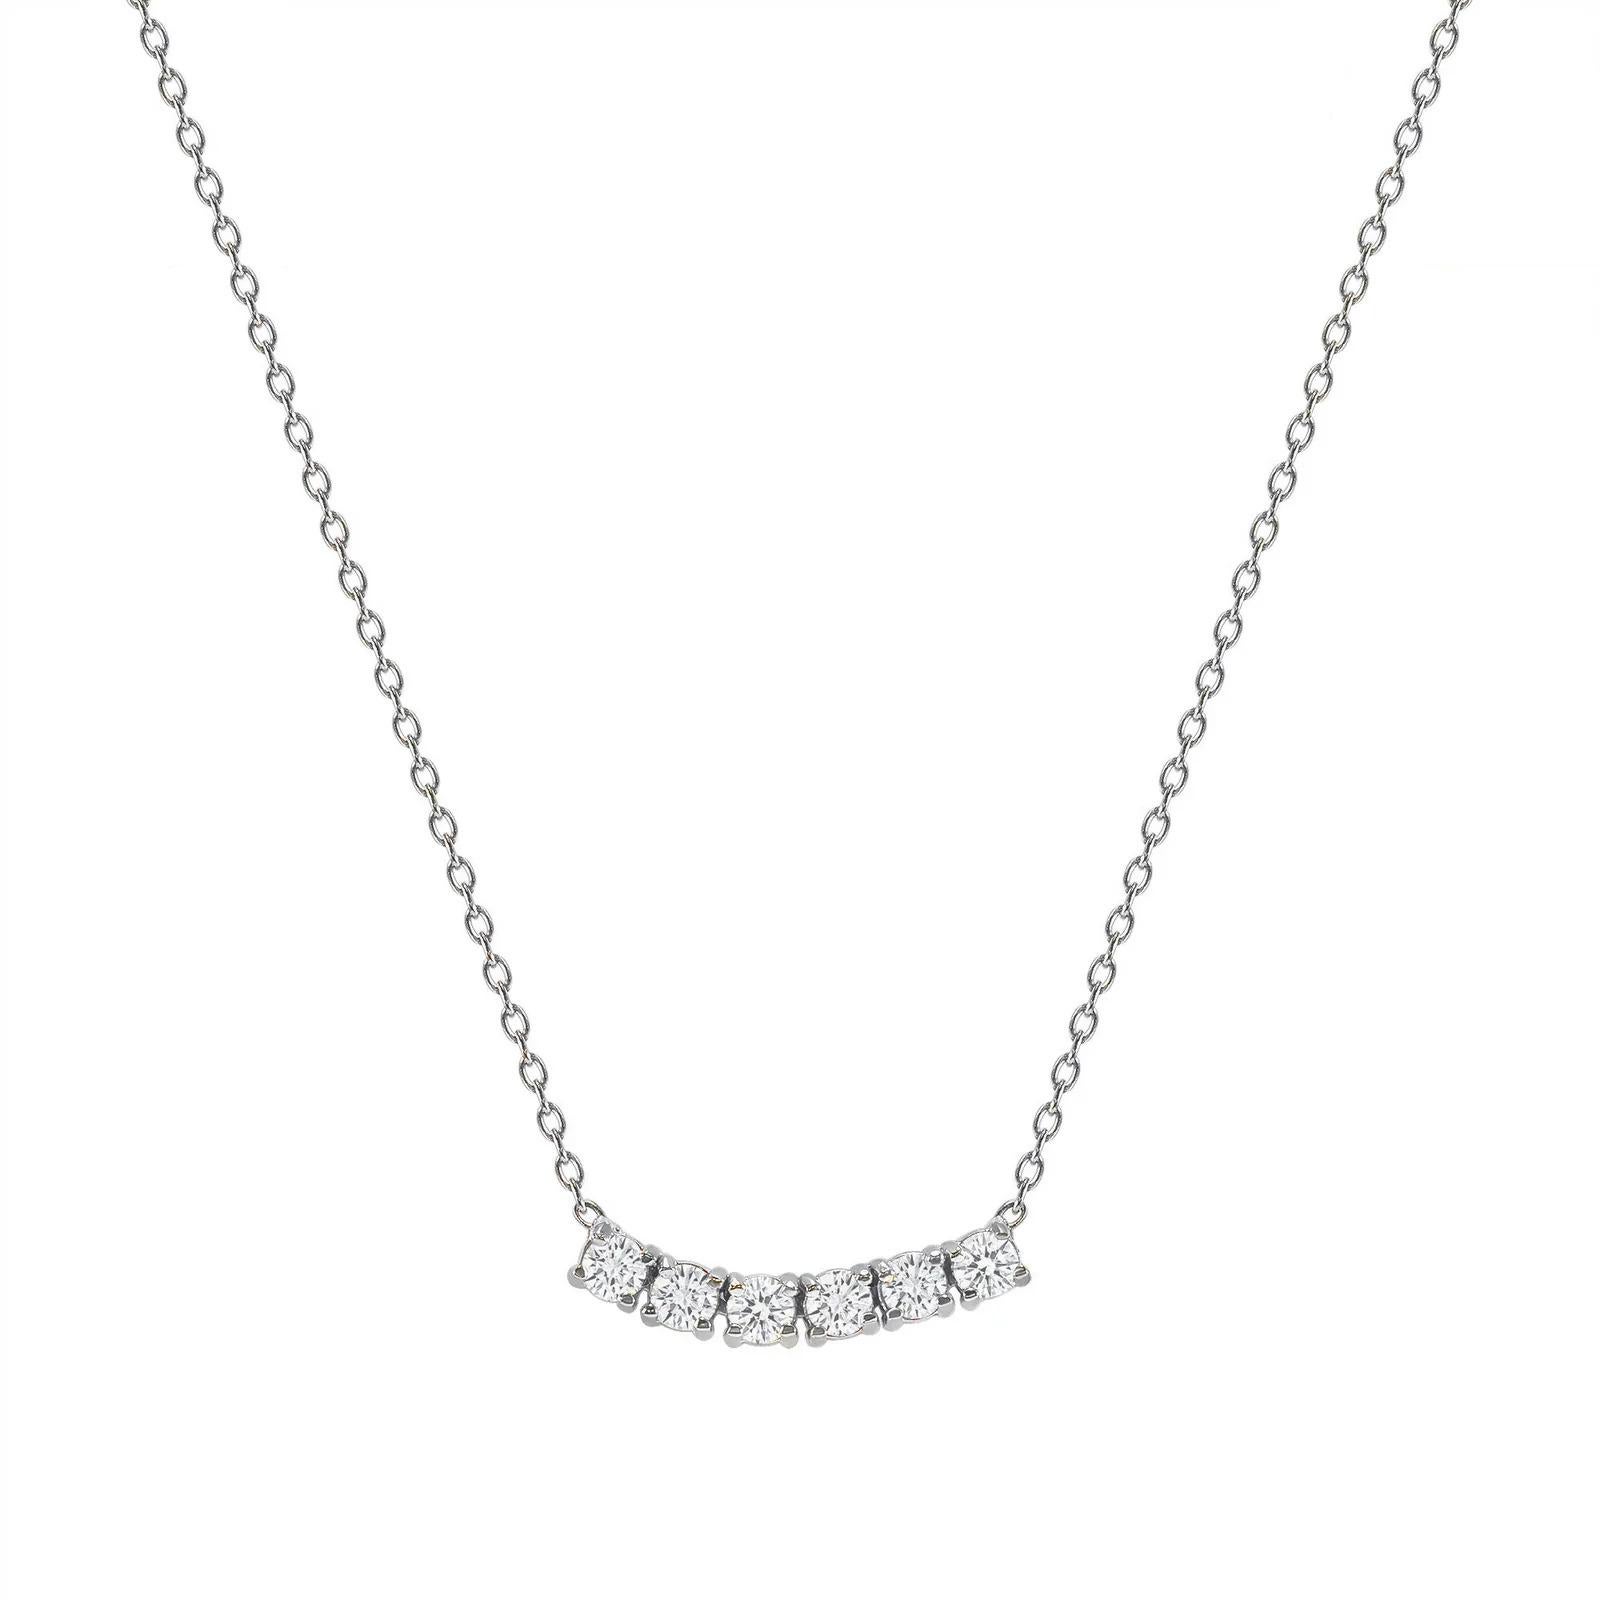 This petite, curved diamond necklace is crafted with gorgeous 14k gold set with six round diamonds.  

Gold: 14k 
Diamond Total Carats: 2 ct
Diamond Cut: Round (6 diamonds)
Diamond Clarity: VS
Diamond Color: F
Color: White Gold
Necklace Length: 20